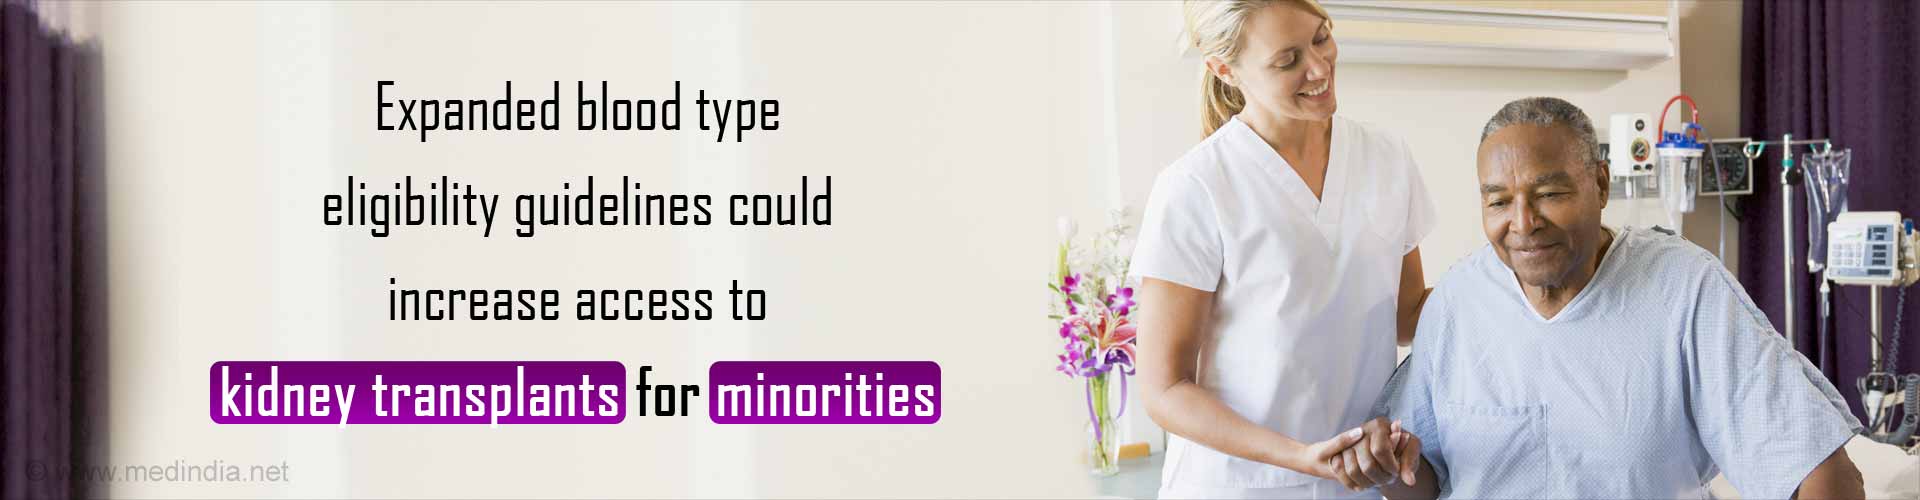 Expanded blood type eligibility guidelines could increase access to kidney transplants for minorities.
